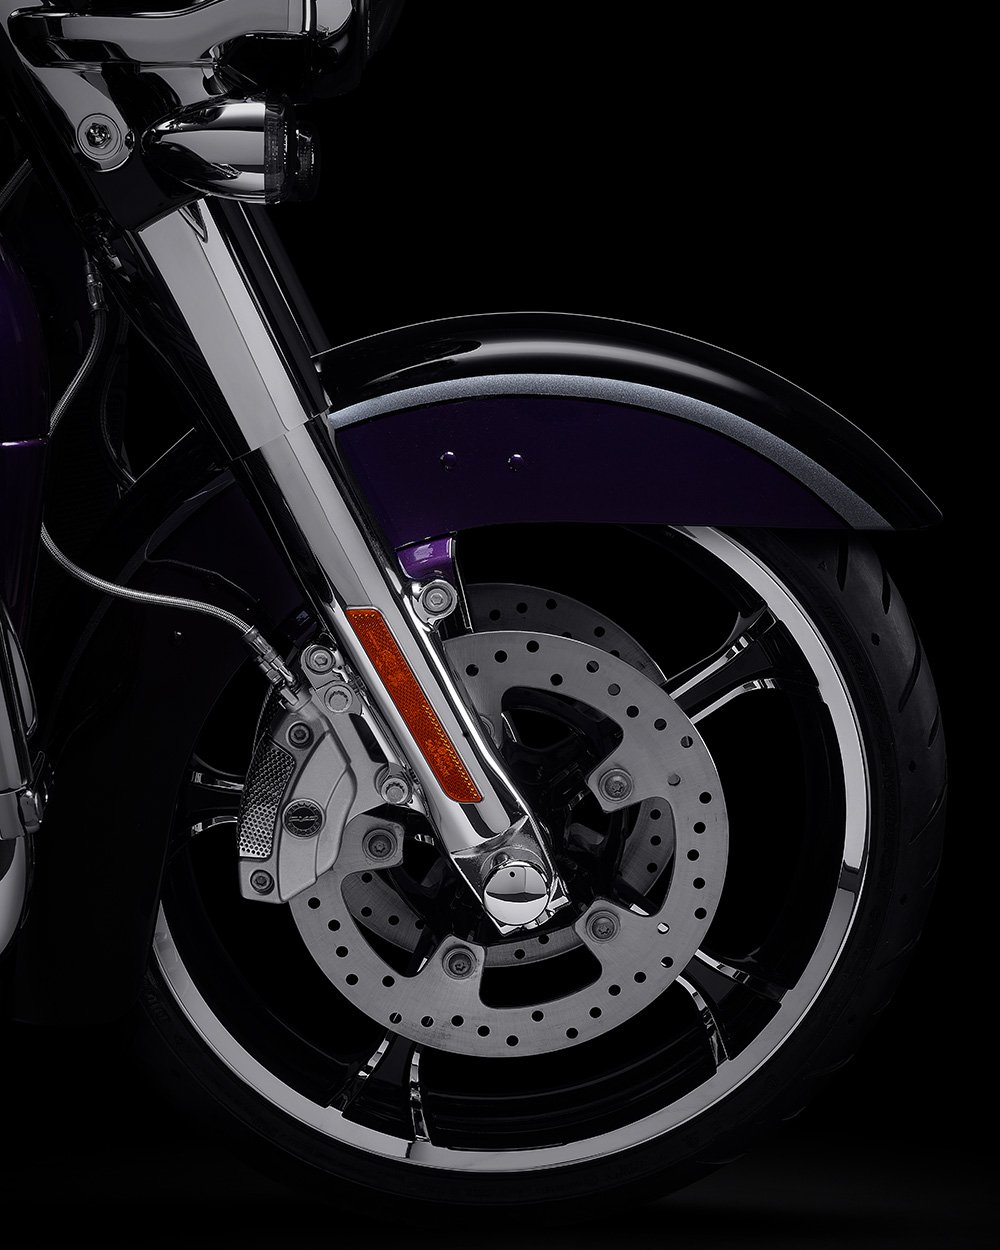 Shocks on a CVO Limited motorcycle